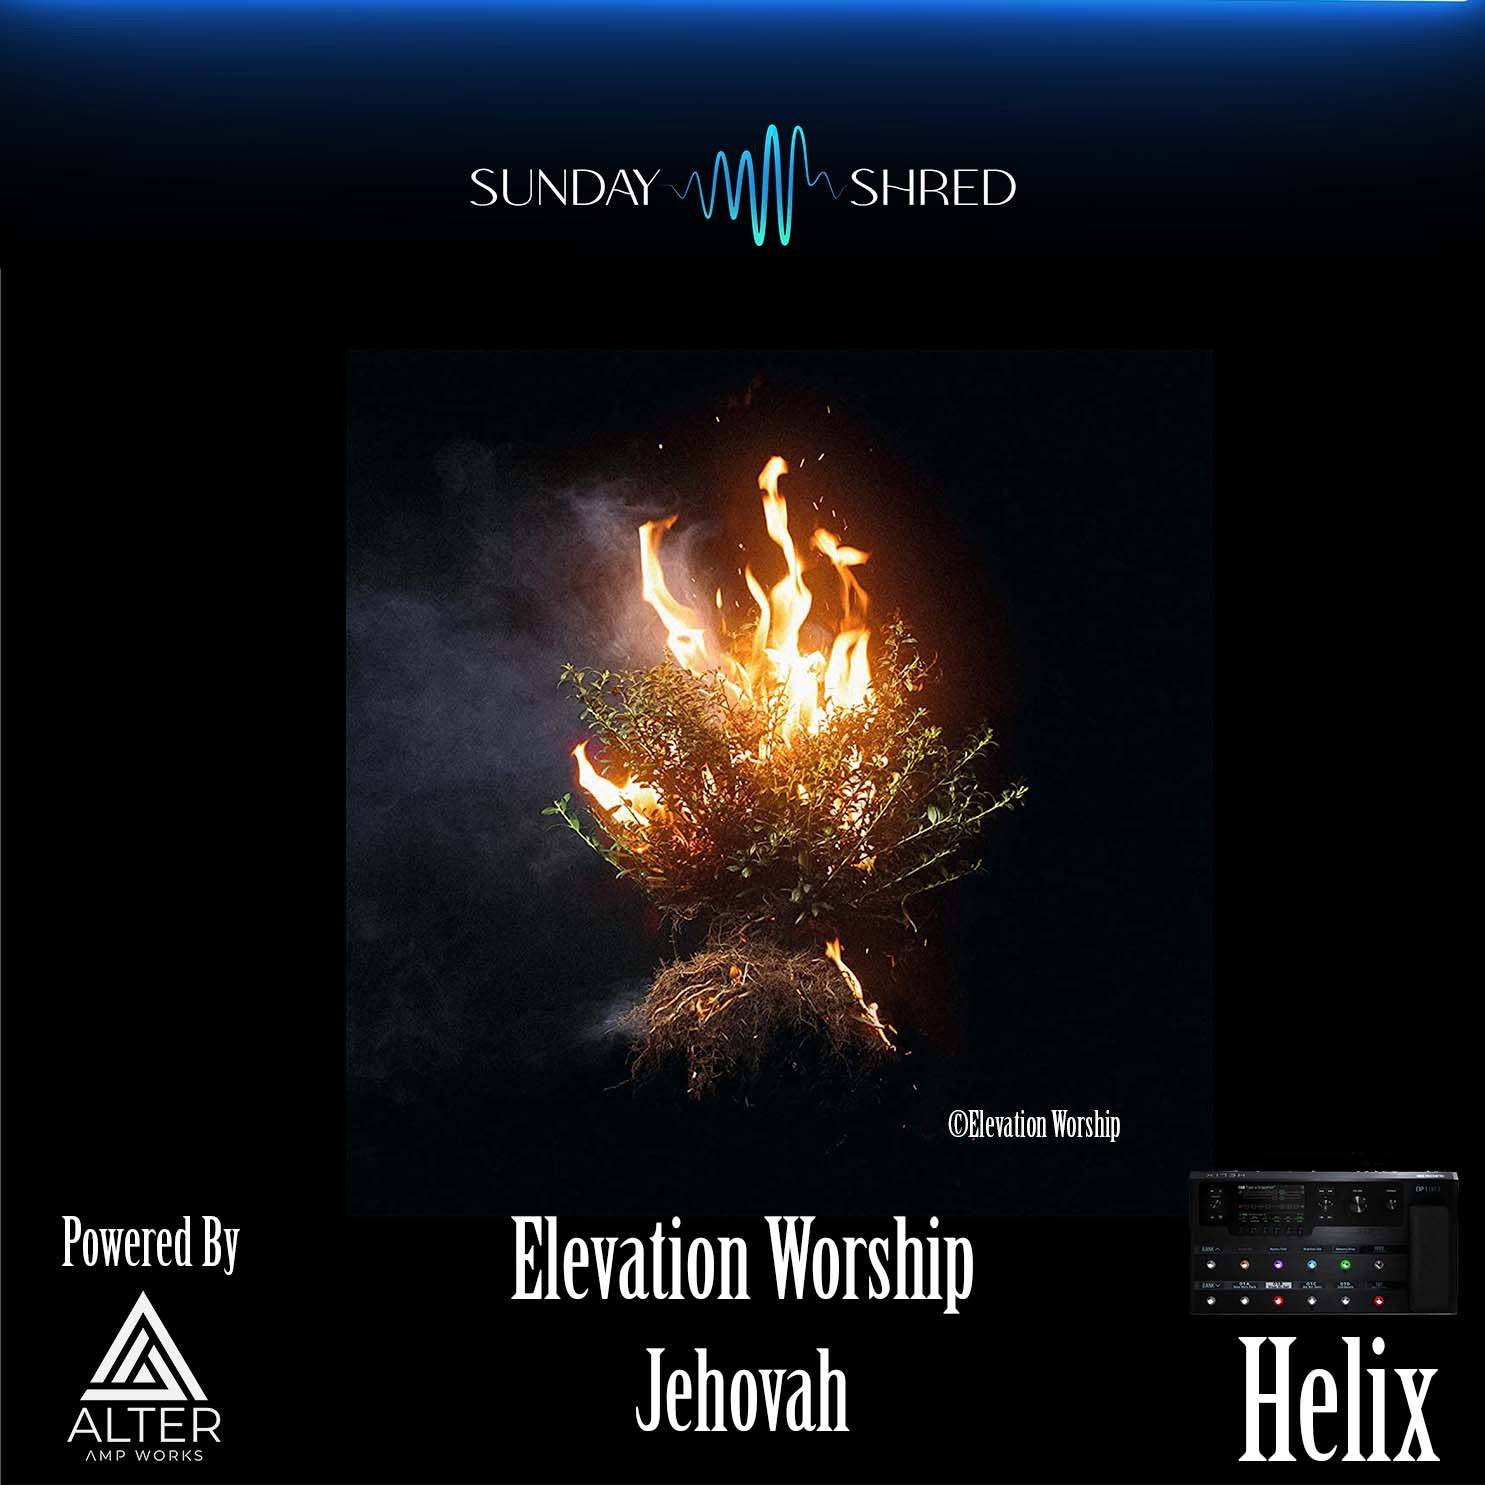  Jehovah - Elevation Worship - Helix Patch